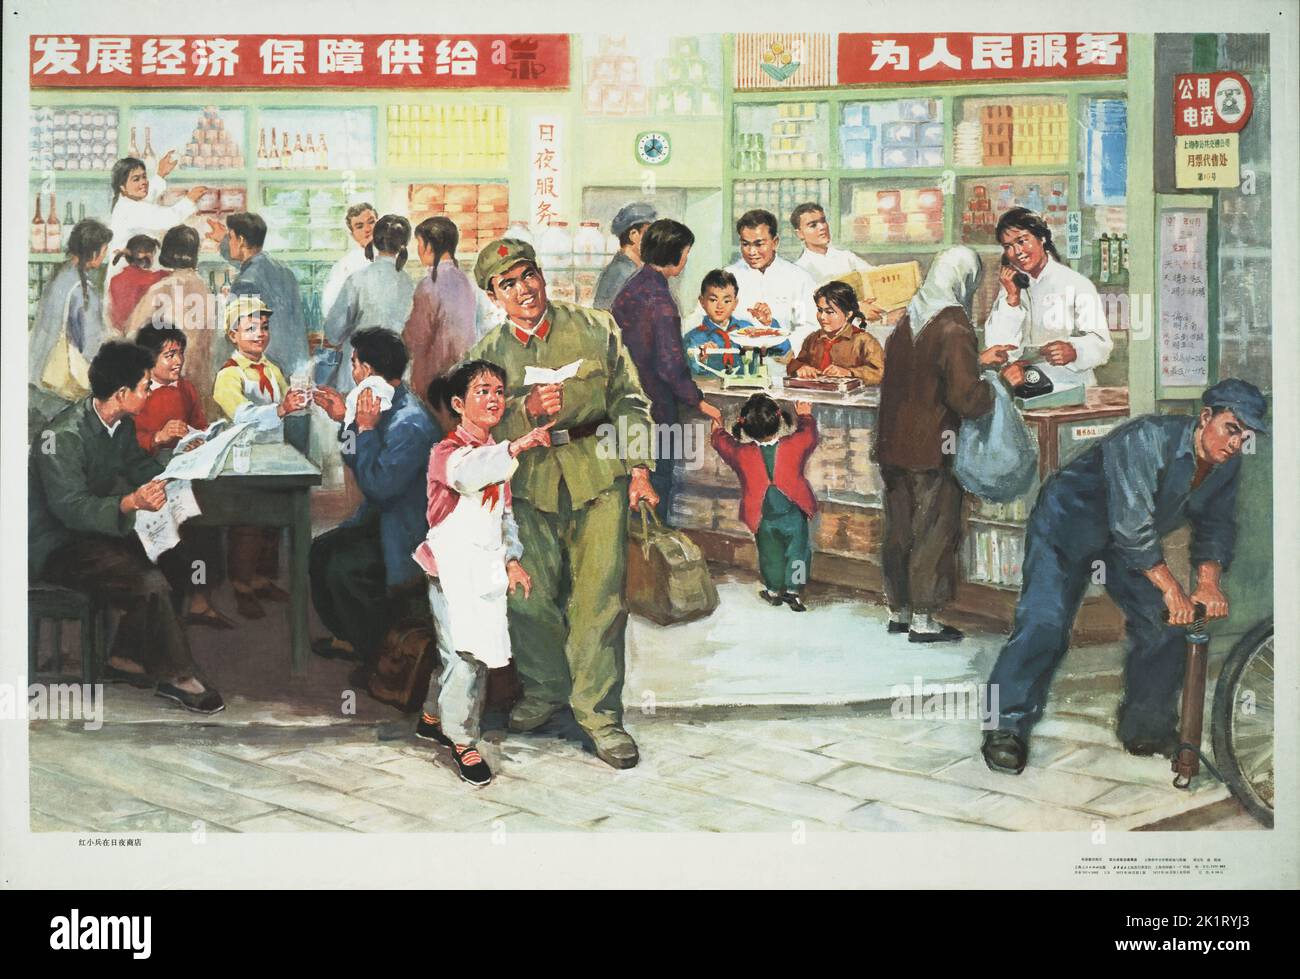 Little red guards at the all-day store. Museum: PRIVATE COLLECTION. Author: Shen Zhan. Stock Photo